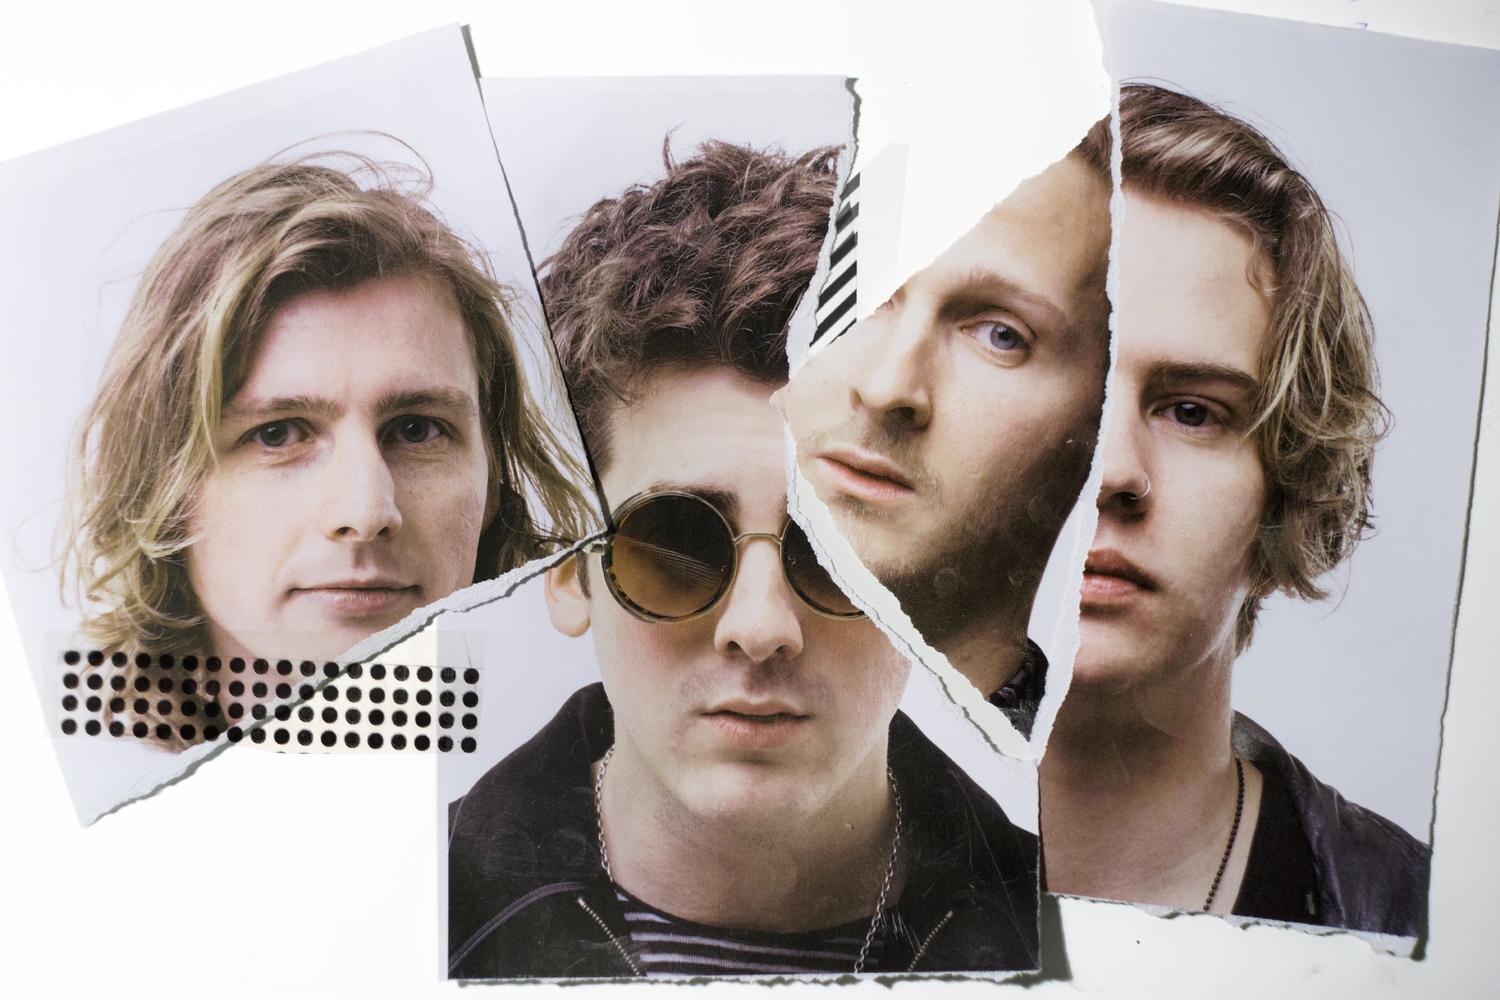 New issue of DIY out now, feat. Circa Waves, Laura Marling, Creeper & more